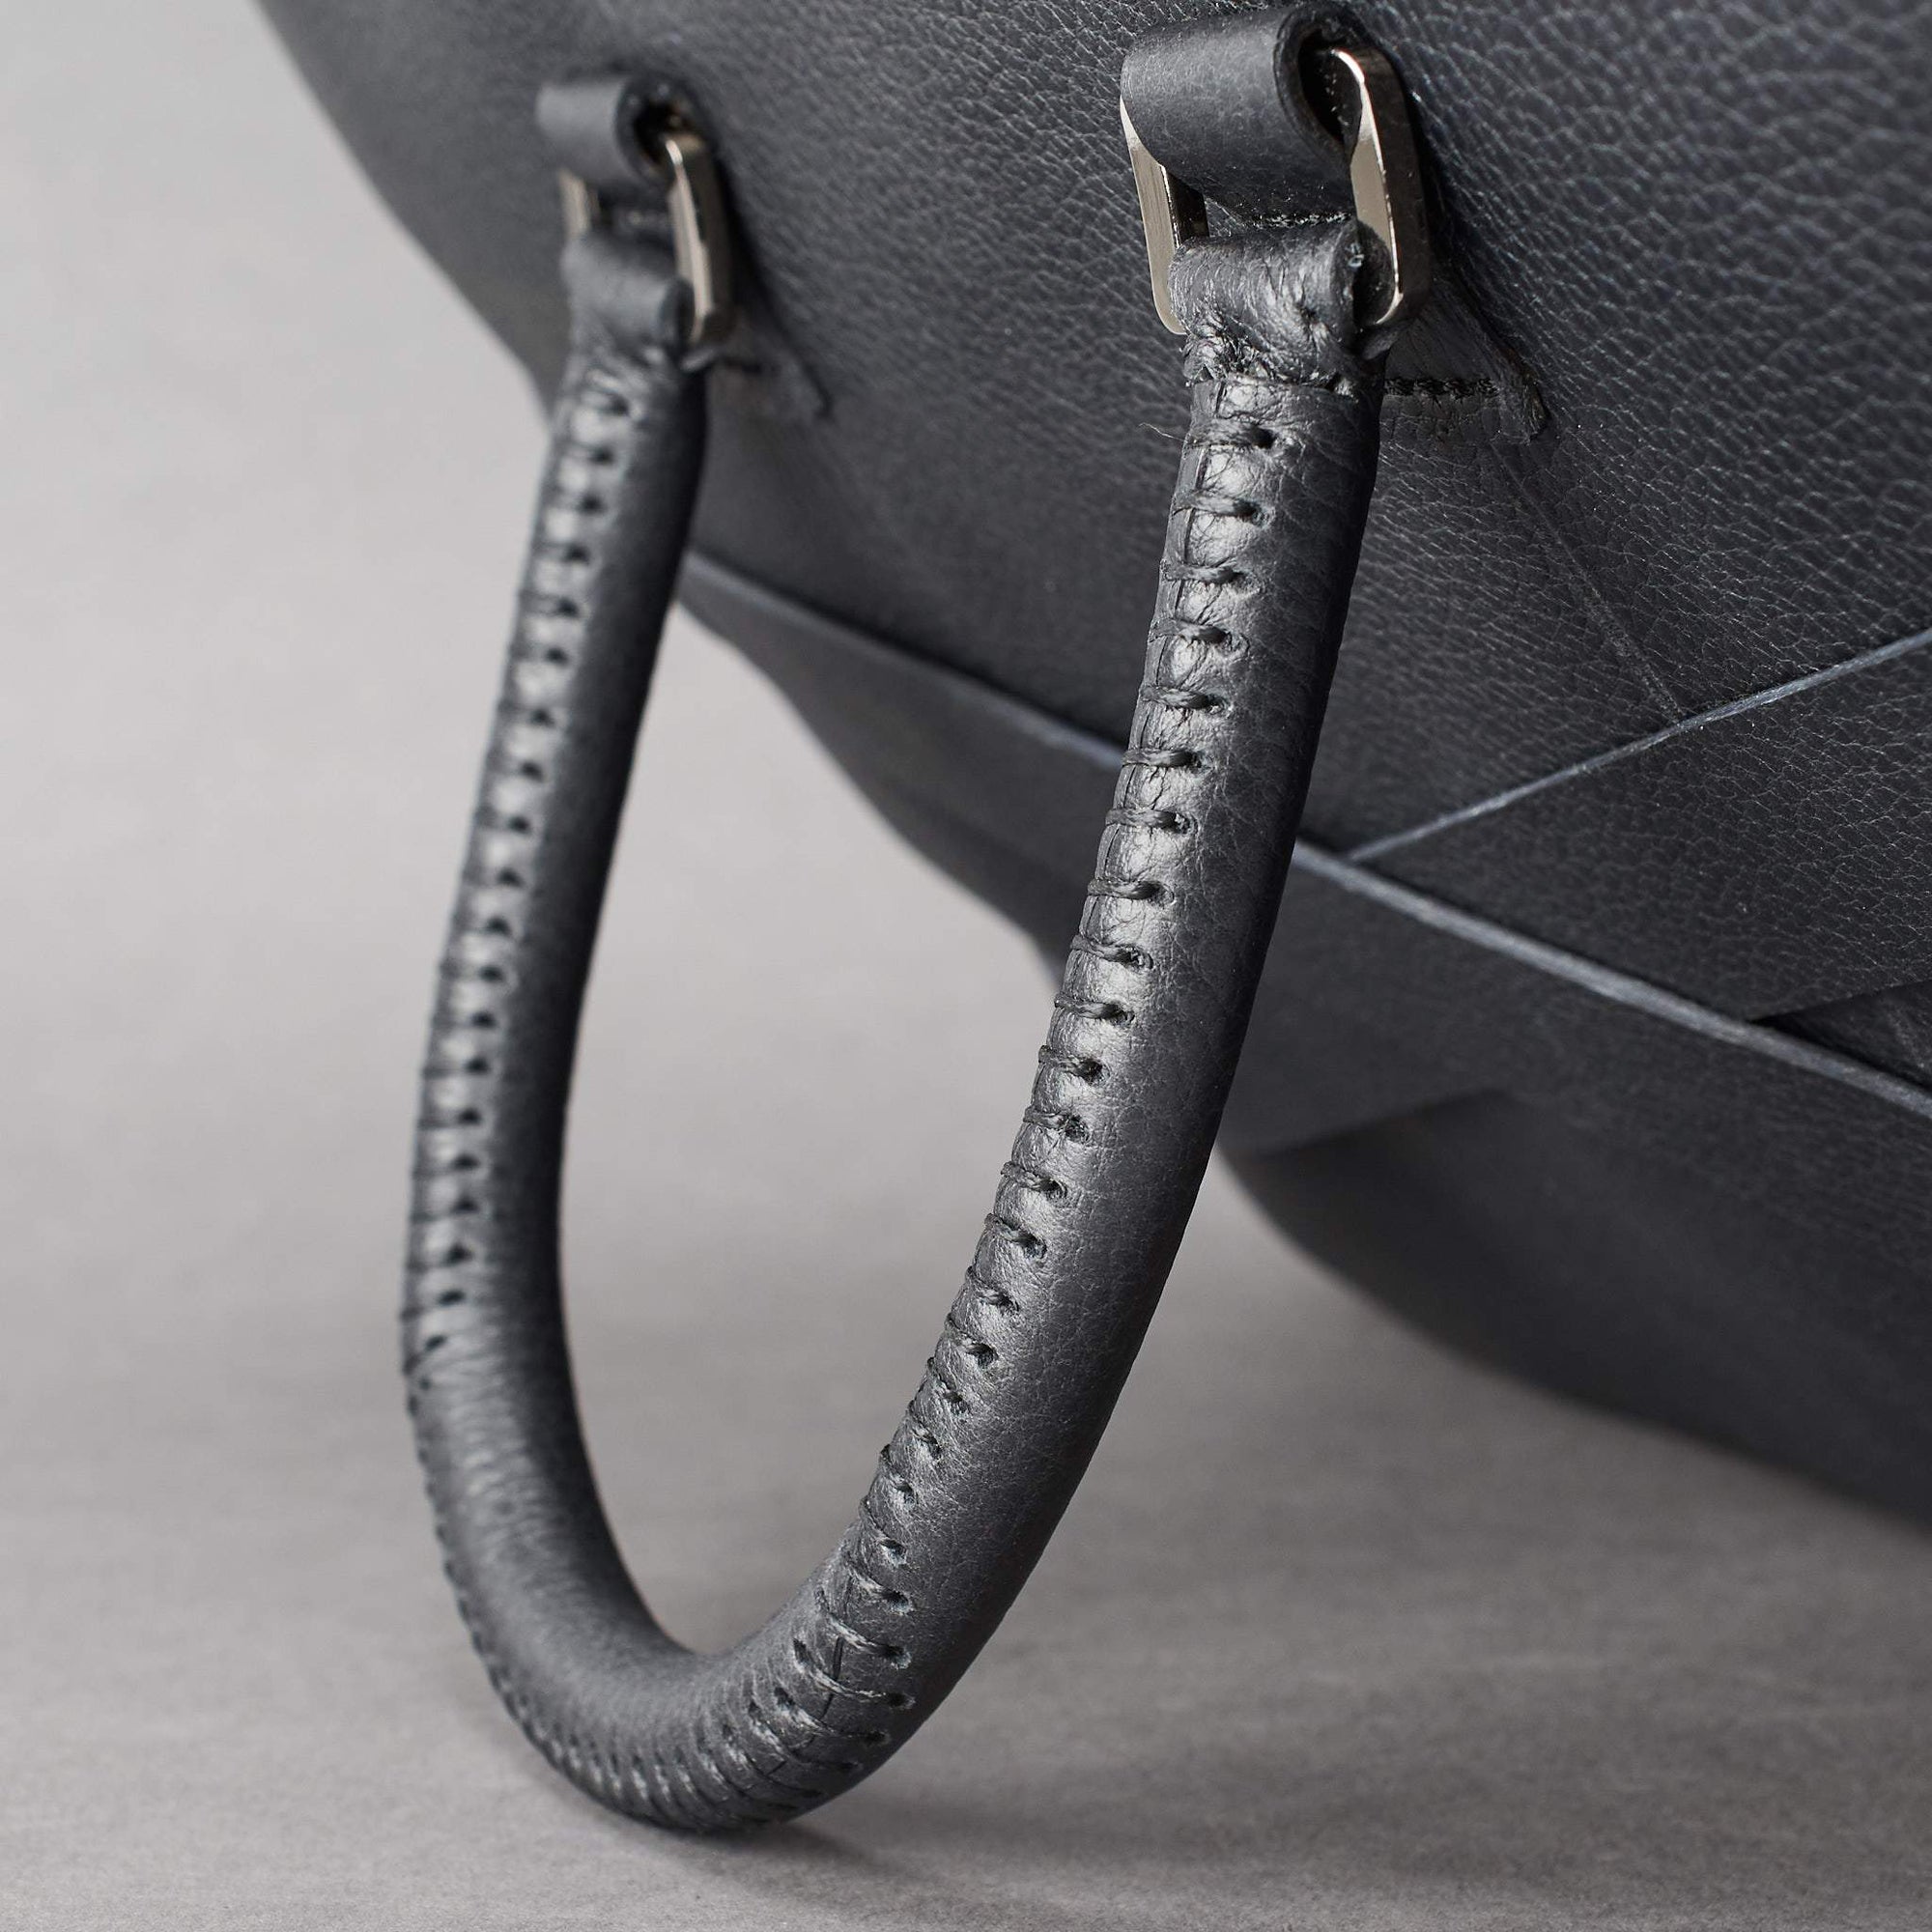 Hand stitch cylindrical handle detail. Black leather briefcase laptop bag for men. Gazeli laptop briefcase by Capra Leather.